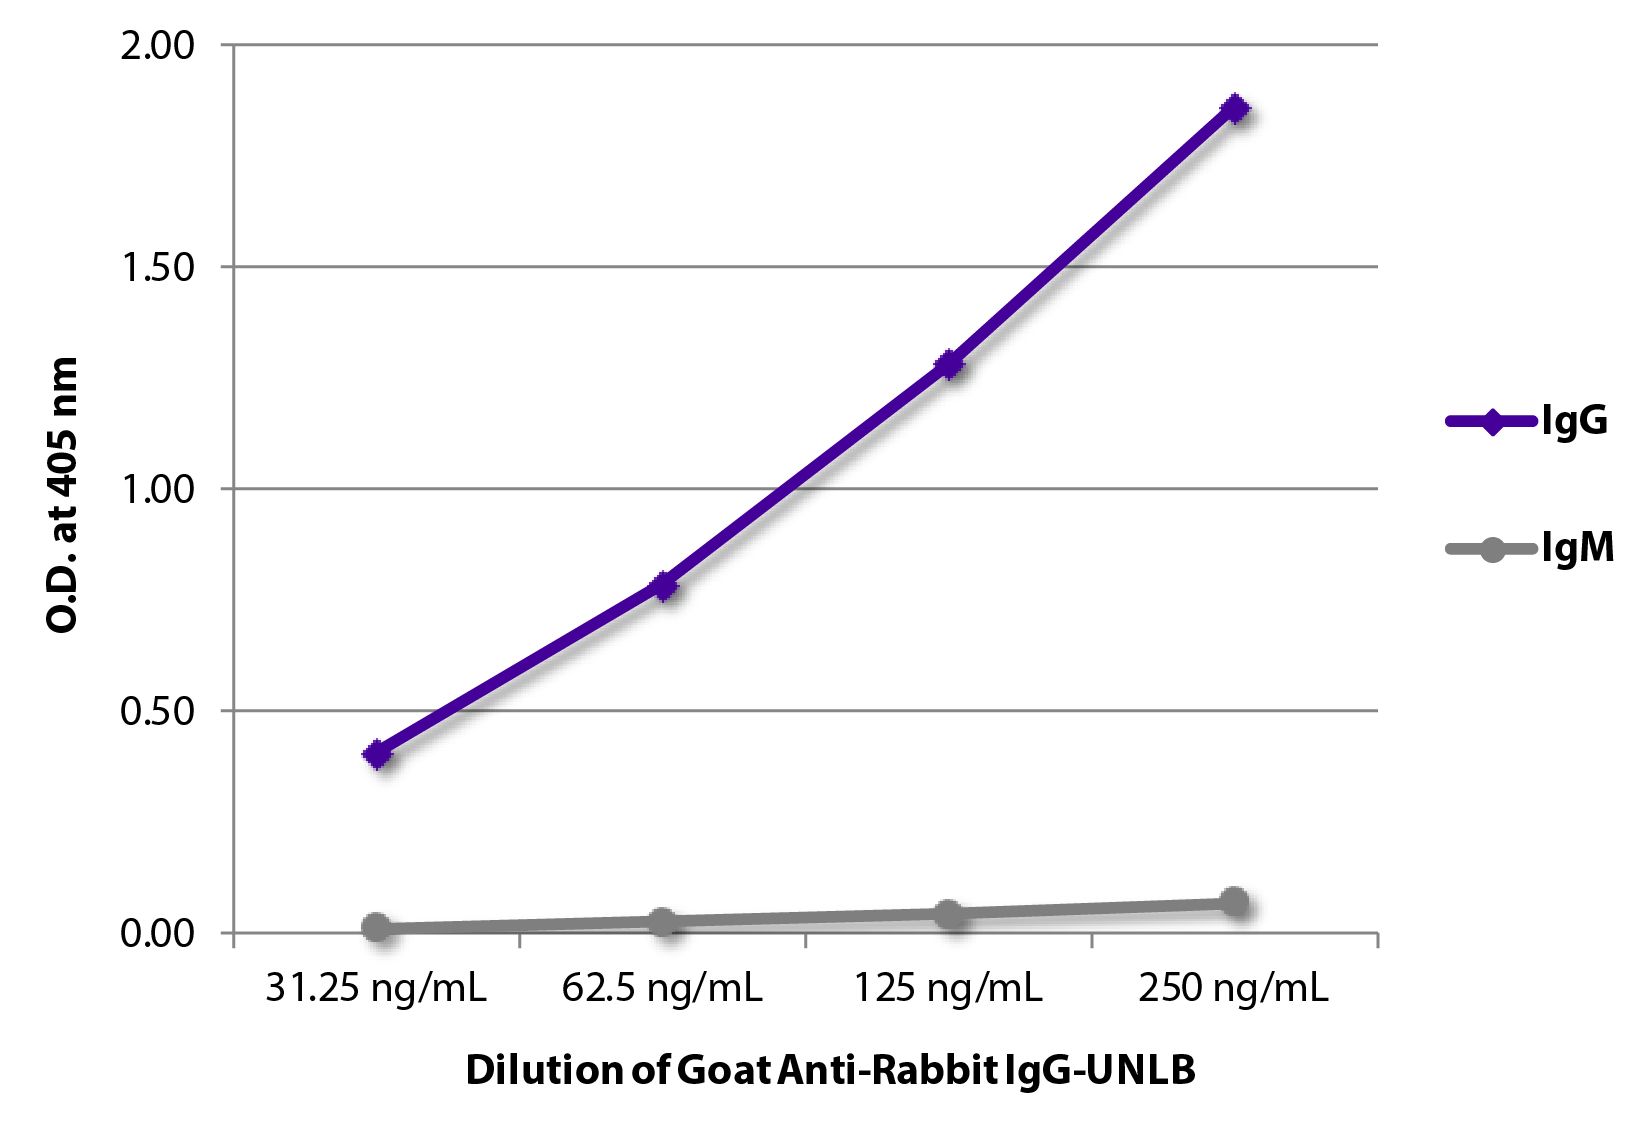 ELISA plate was coated with purified rabbit IgG and IgM.  Immunoglobulins were detected with serially diluted Goat Anti-Rabbit IgG-UNLB (SB Cat. No. 4030-01) followed by Mouse Anti-Goat IgG Fc-HRP (SB Cat. No. 6158-05).